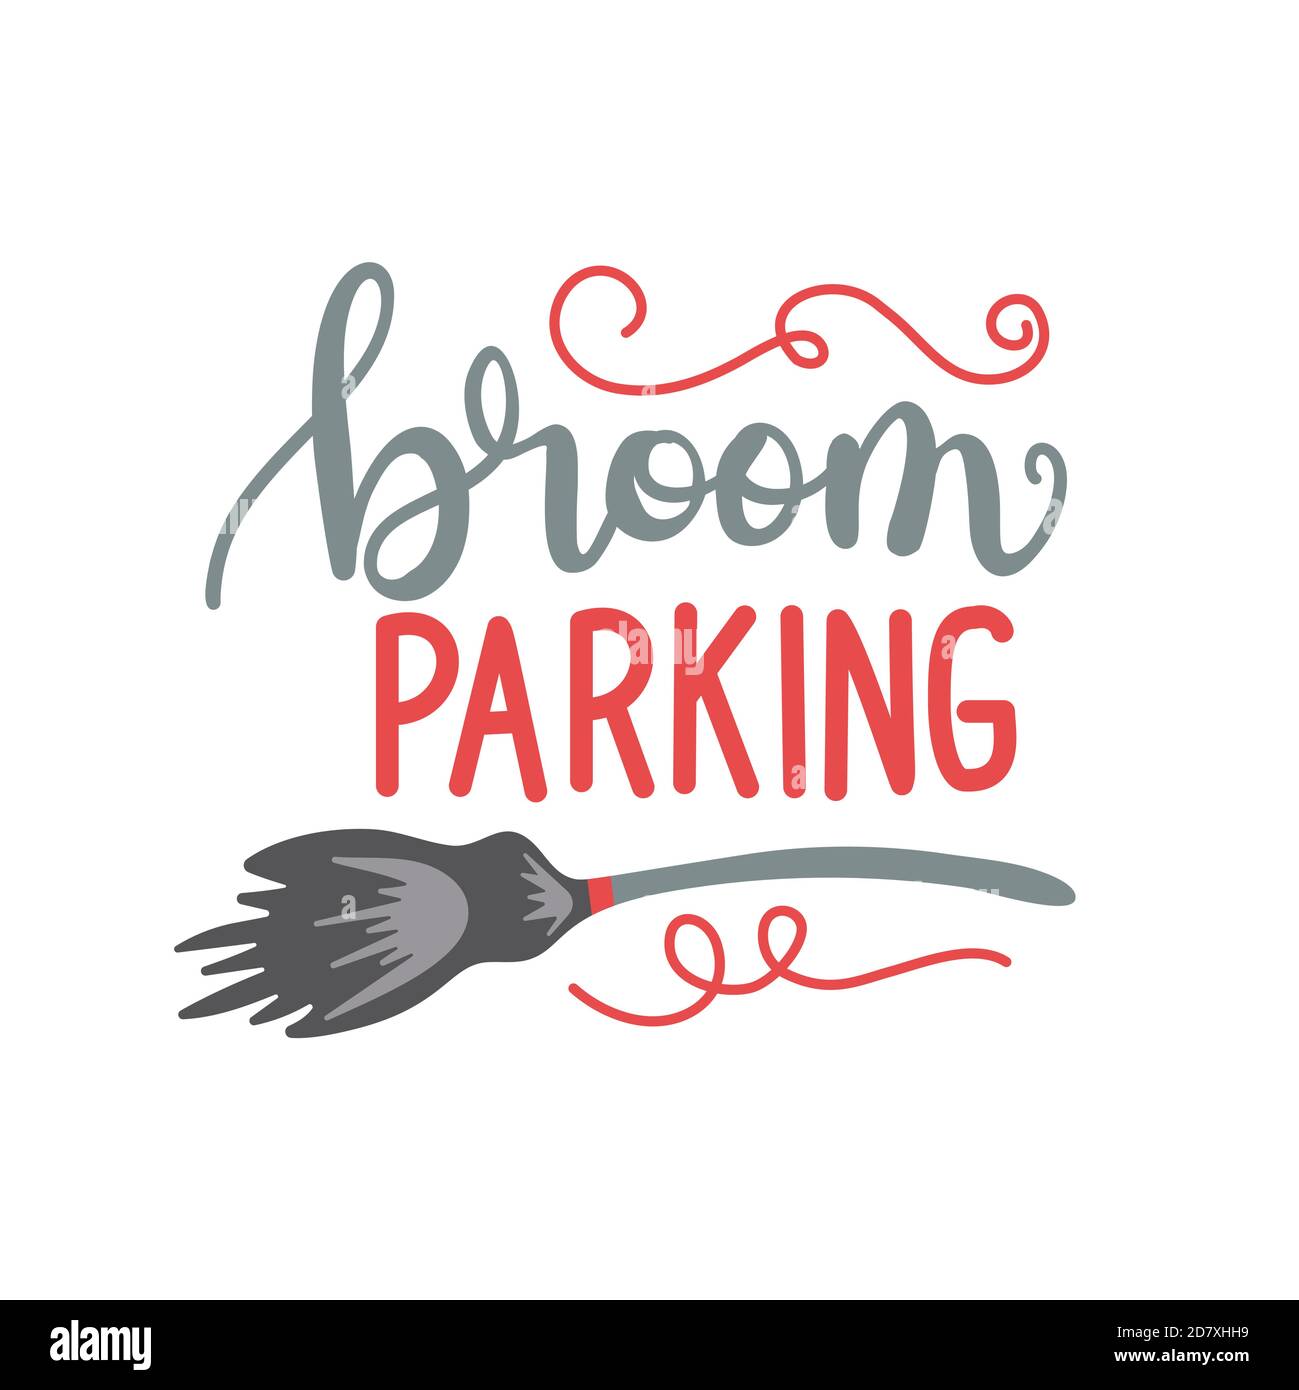 Broom parking sign. Magic vehicle of the witch hand drawn ink style boho chic sticker, patch, flash tattoo or print design vector illustration Stock Vector